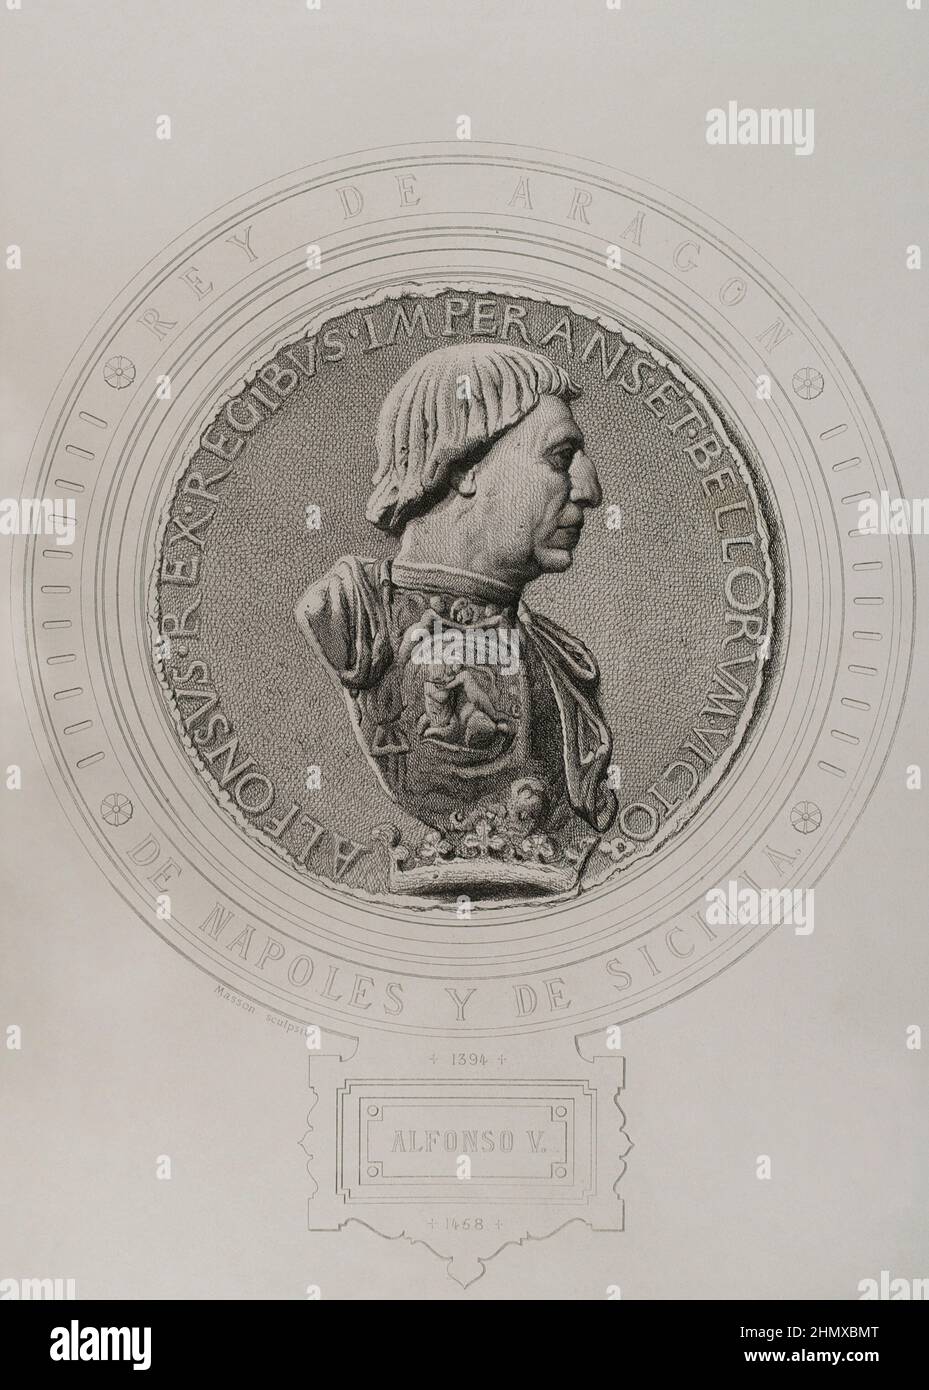 Alfonso V the Magnanimous (1396-1458). Alfonso IV as Count of Barcelona, Alfonso III as King of Valencia and Alfonso I as King of Mallorca and Naples. King of the Crown of Aragon (1416-1458). King of Naples (1442-1458). Portrait. Engraving by Masson. Lithographed by Magín Pujadas. 'Historia General de España' by Modesto Lafuente. Volume II. Published in Barcelona, 1879. Author: Antoine Masson (1636-1700). French artist. Stock Photo